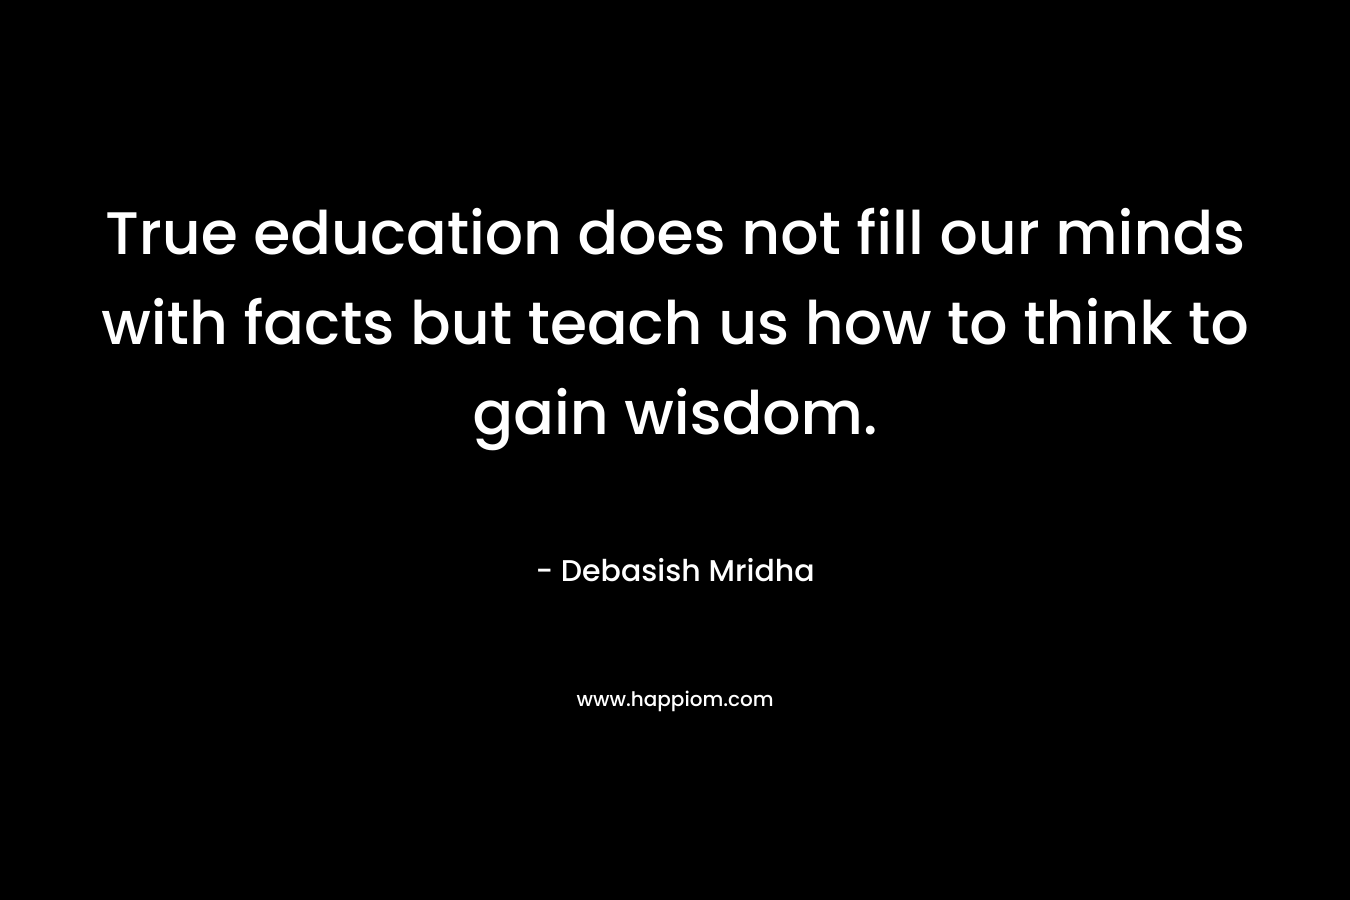 True education does not fill our minds with facts but teach us how to think to gain wisdom. – Debasish Mridha